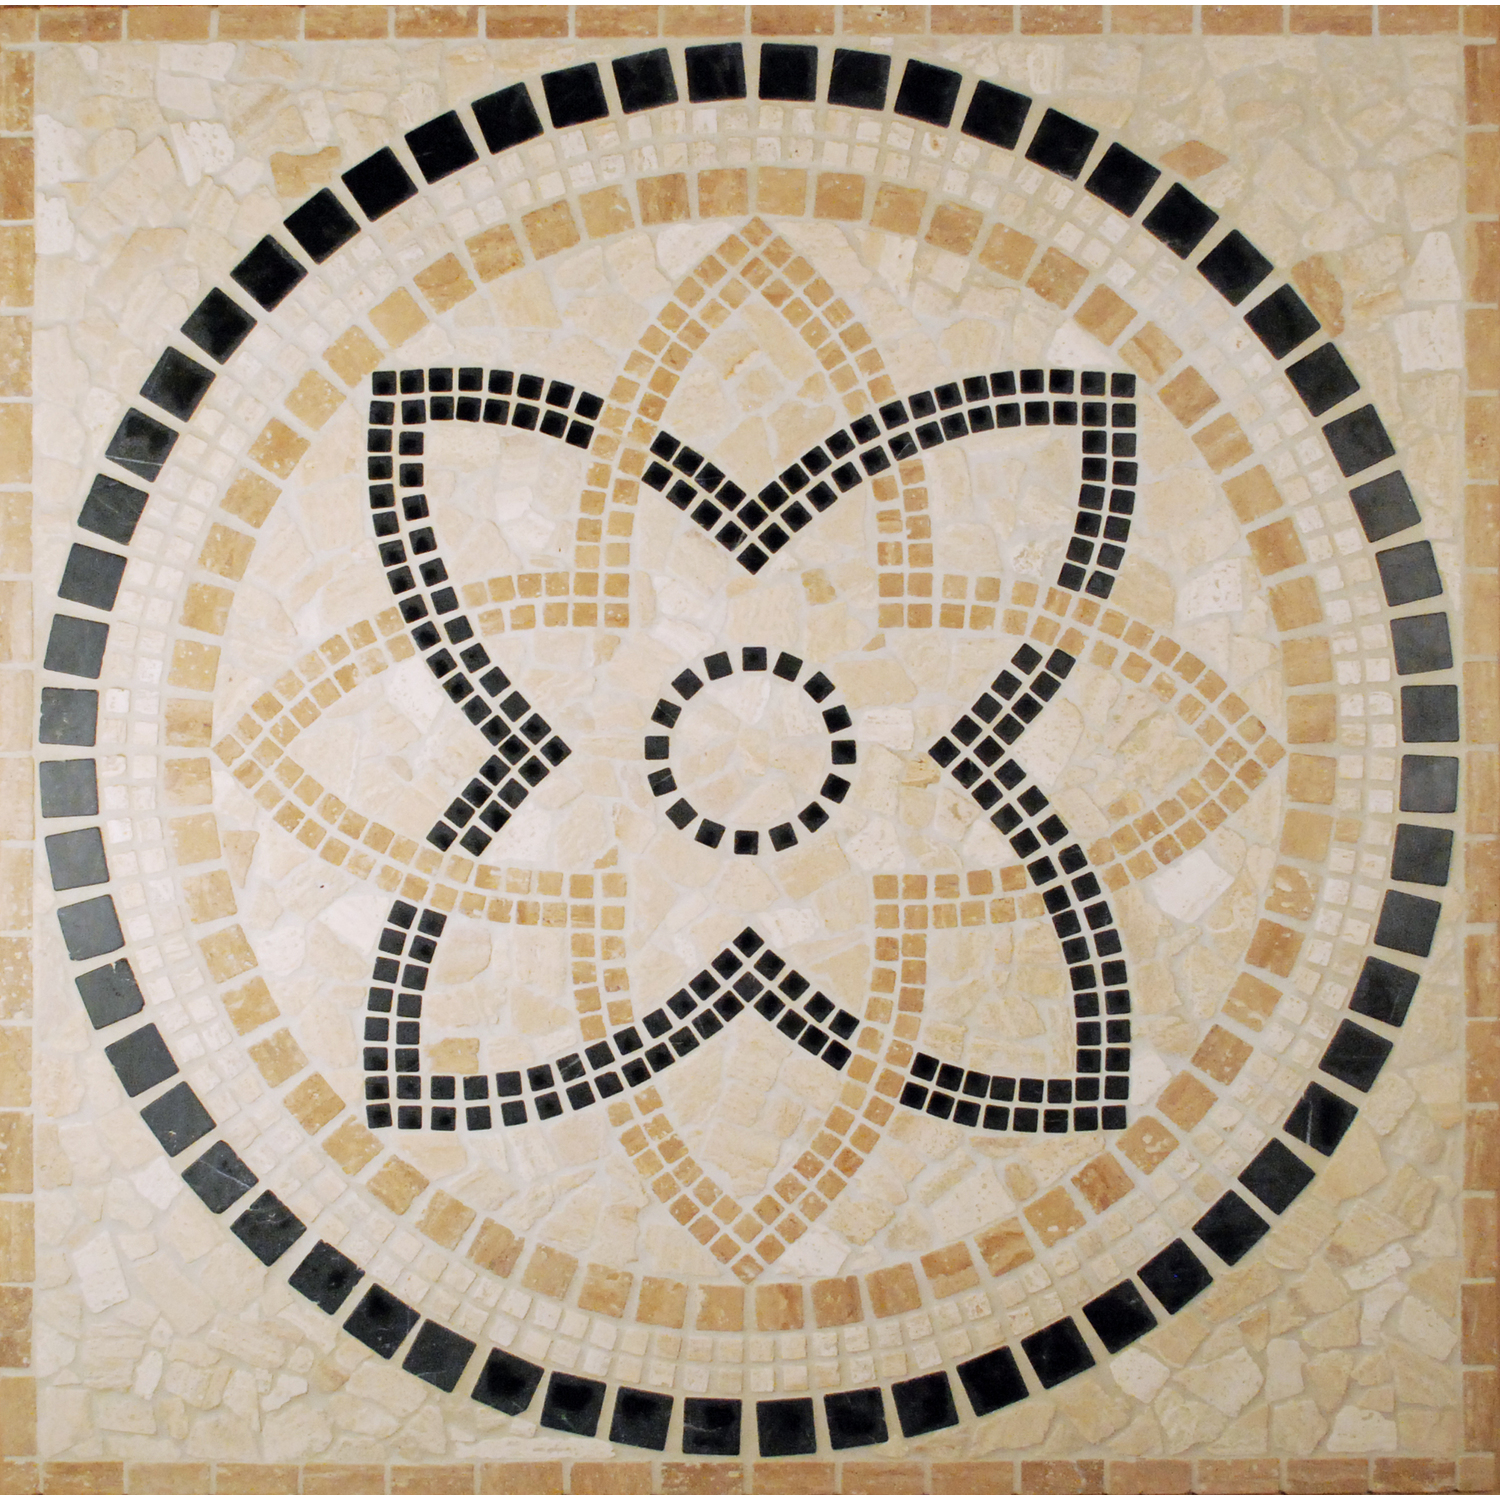 Tesoro 36X36 square tumbled medallion from APPIA - DRIAPPMED